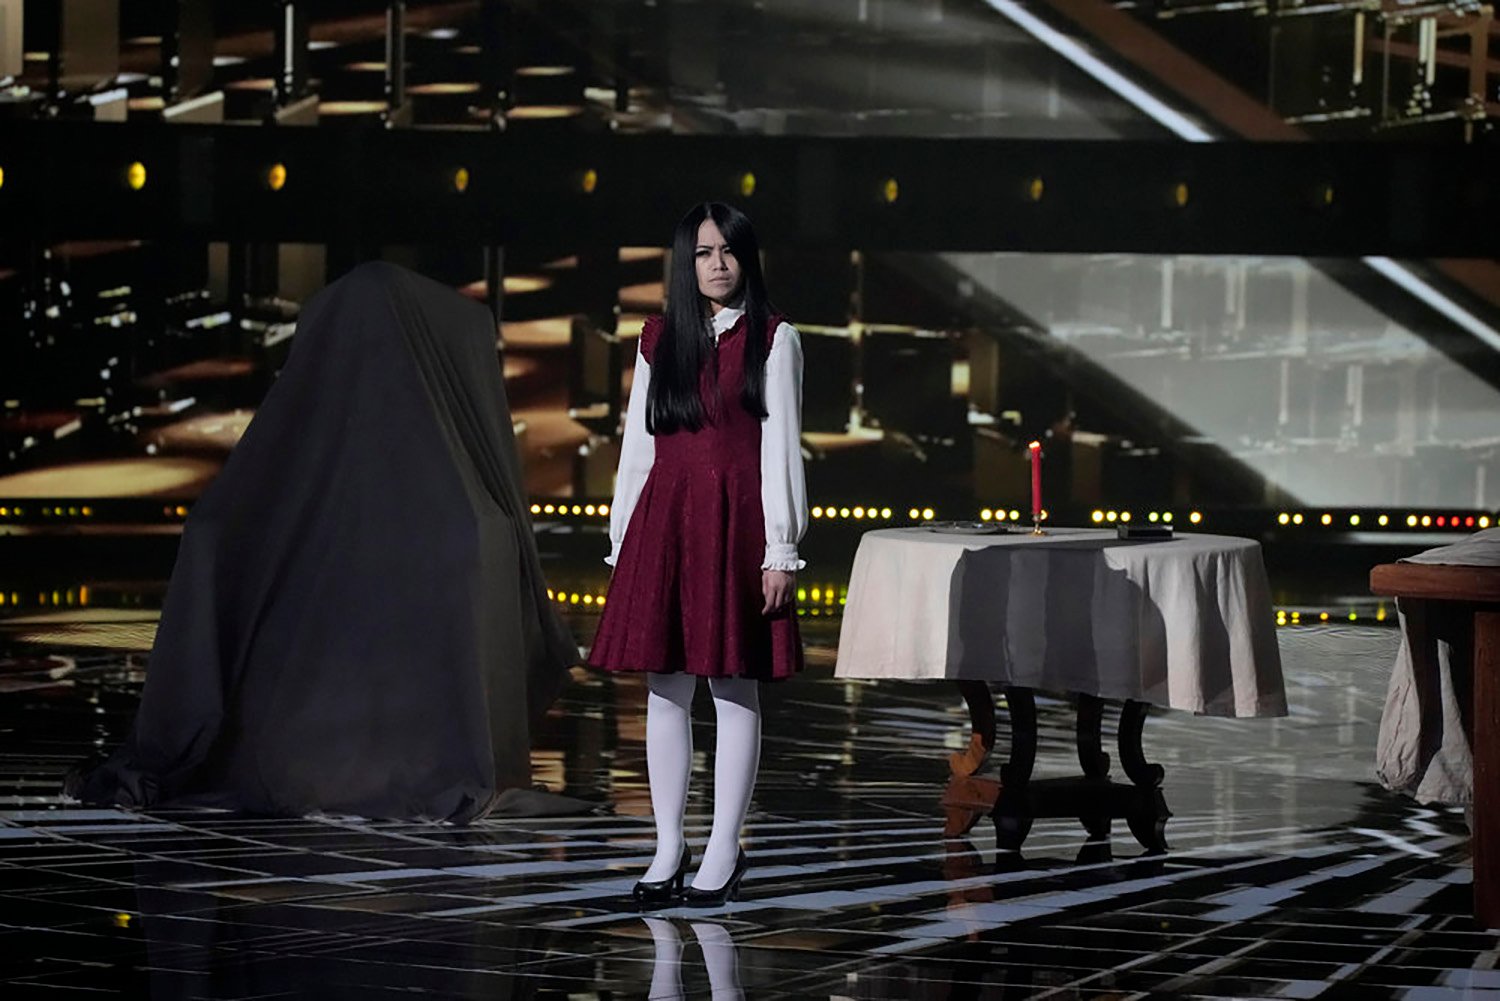 ‘America’s Got Talent’: The Sacred Riana, 1 of the Most Viral Acts Ever, Returns to Curse Howie Mandel